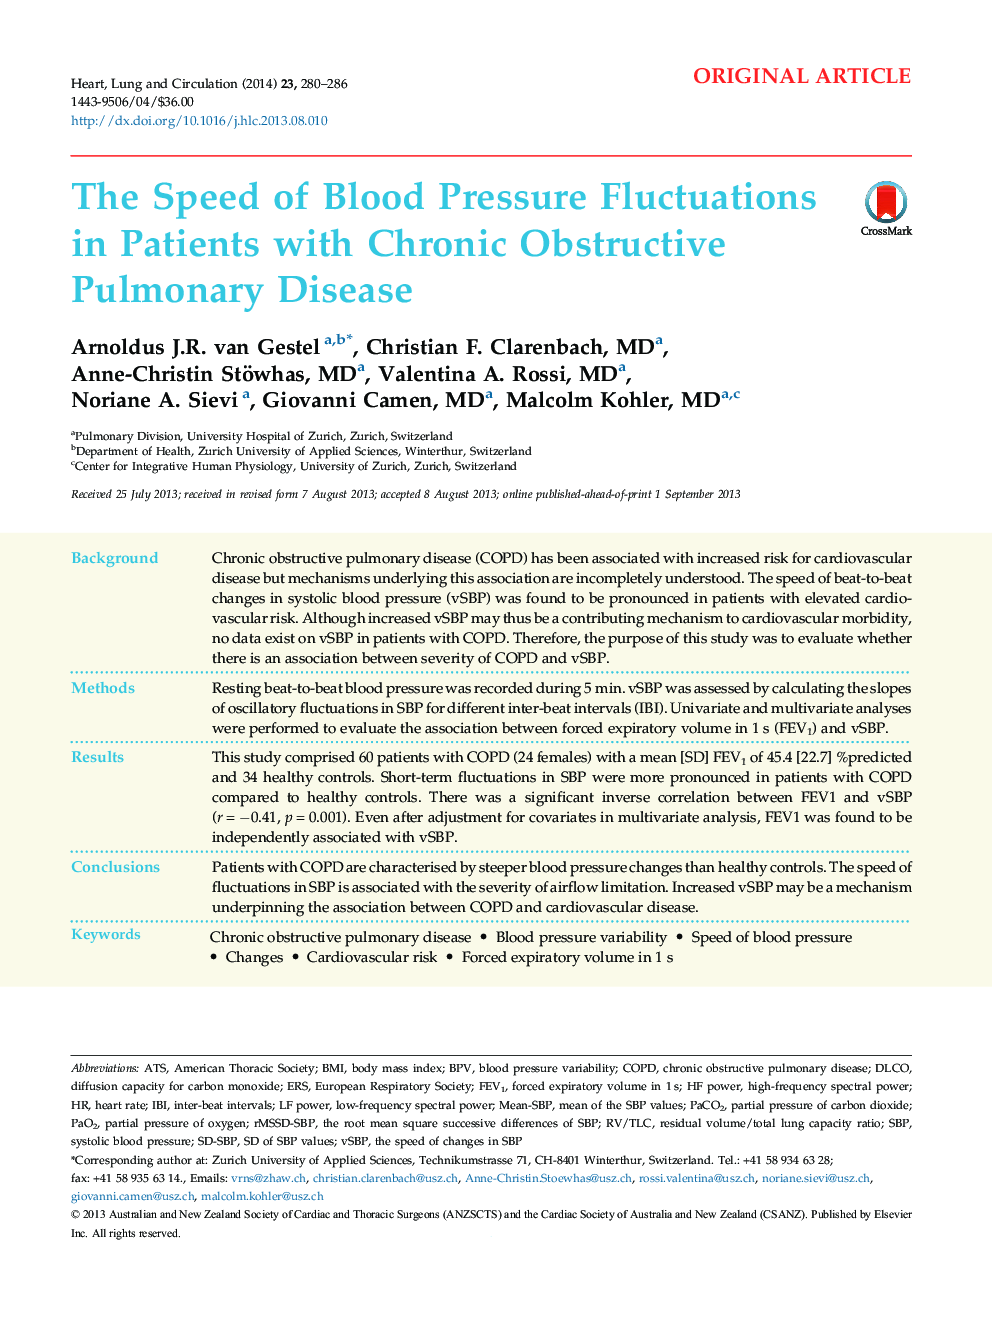 The Speed of Blood Pressure Fluctuations in Patients with Chronic Obstructive Pulmonary Disease